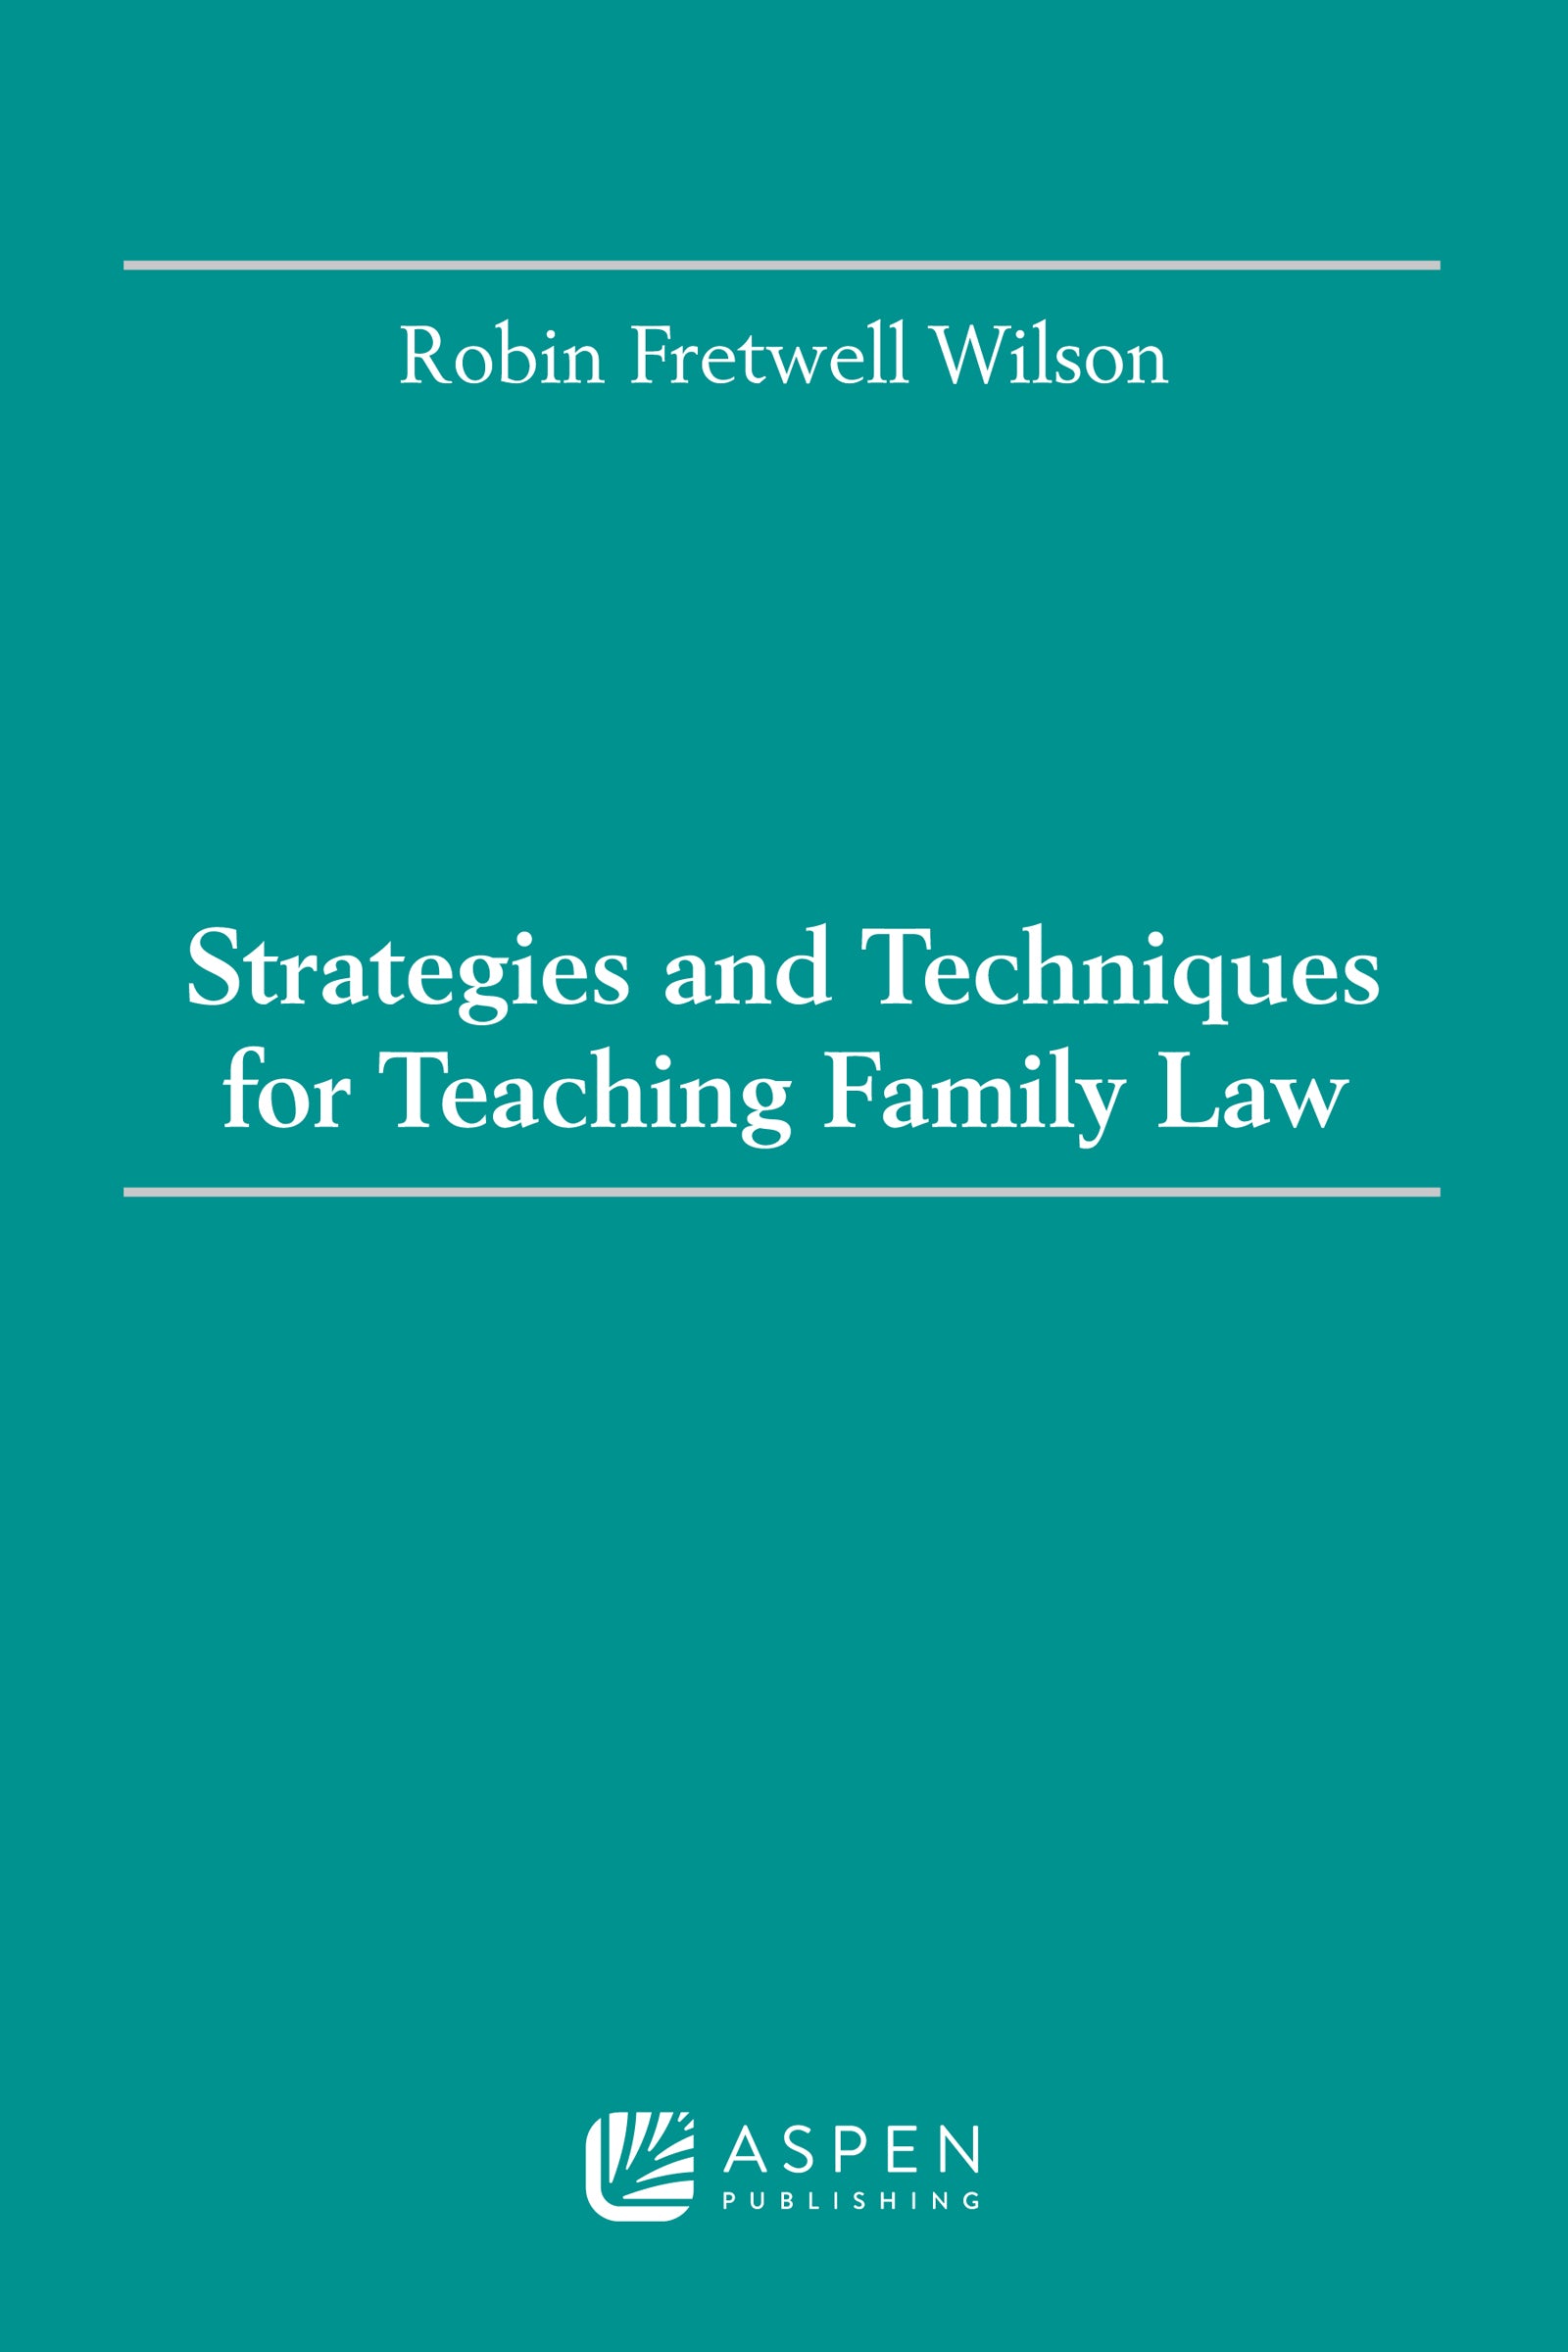 Strategies and Techniques for Teaching Family Law